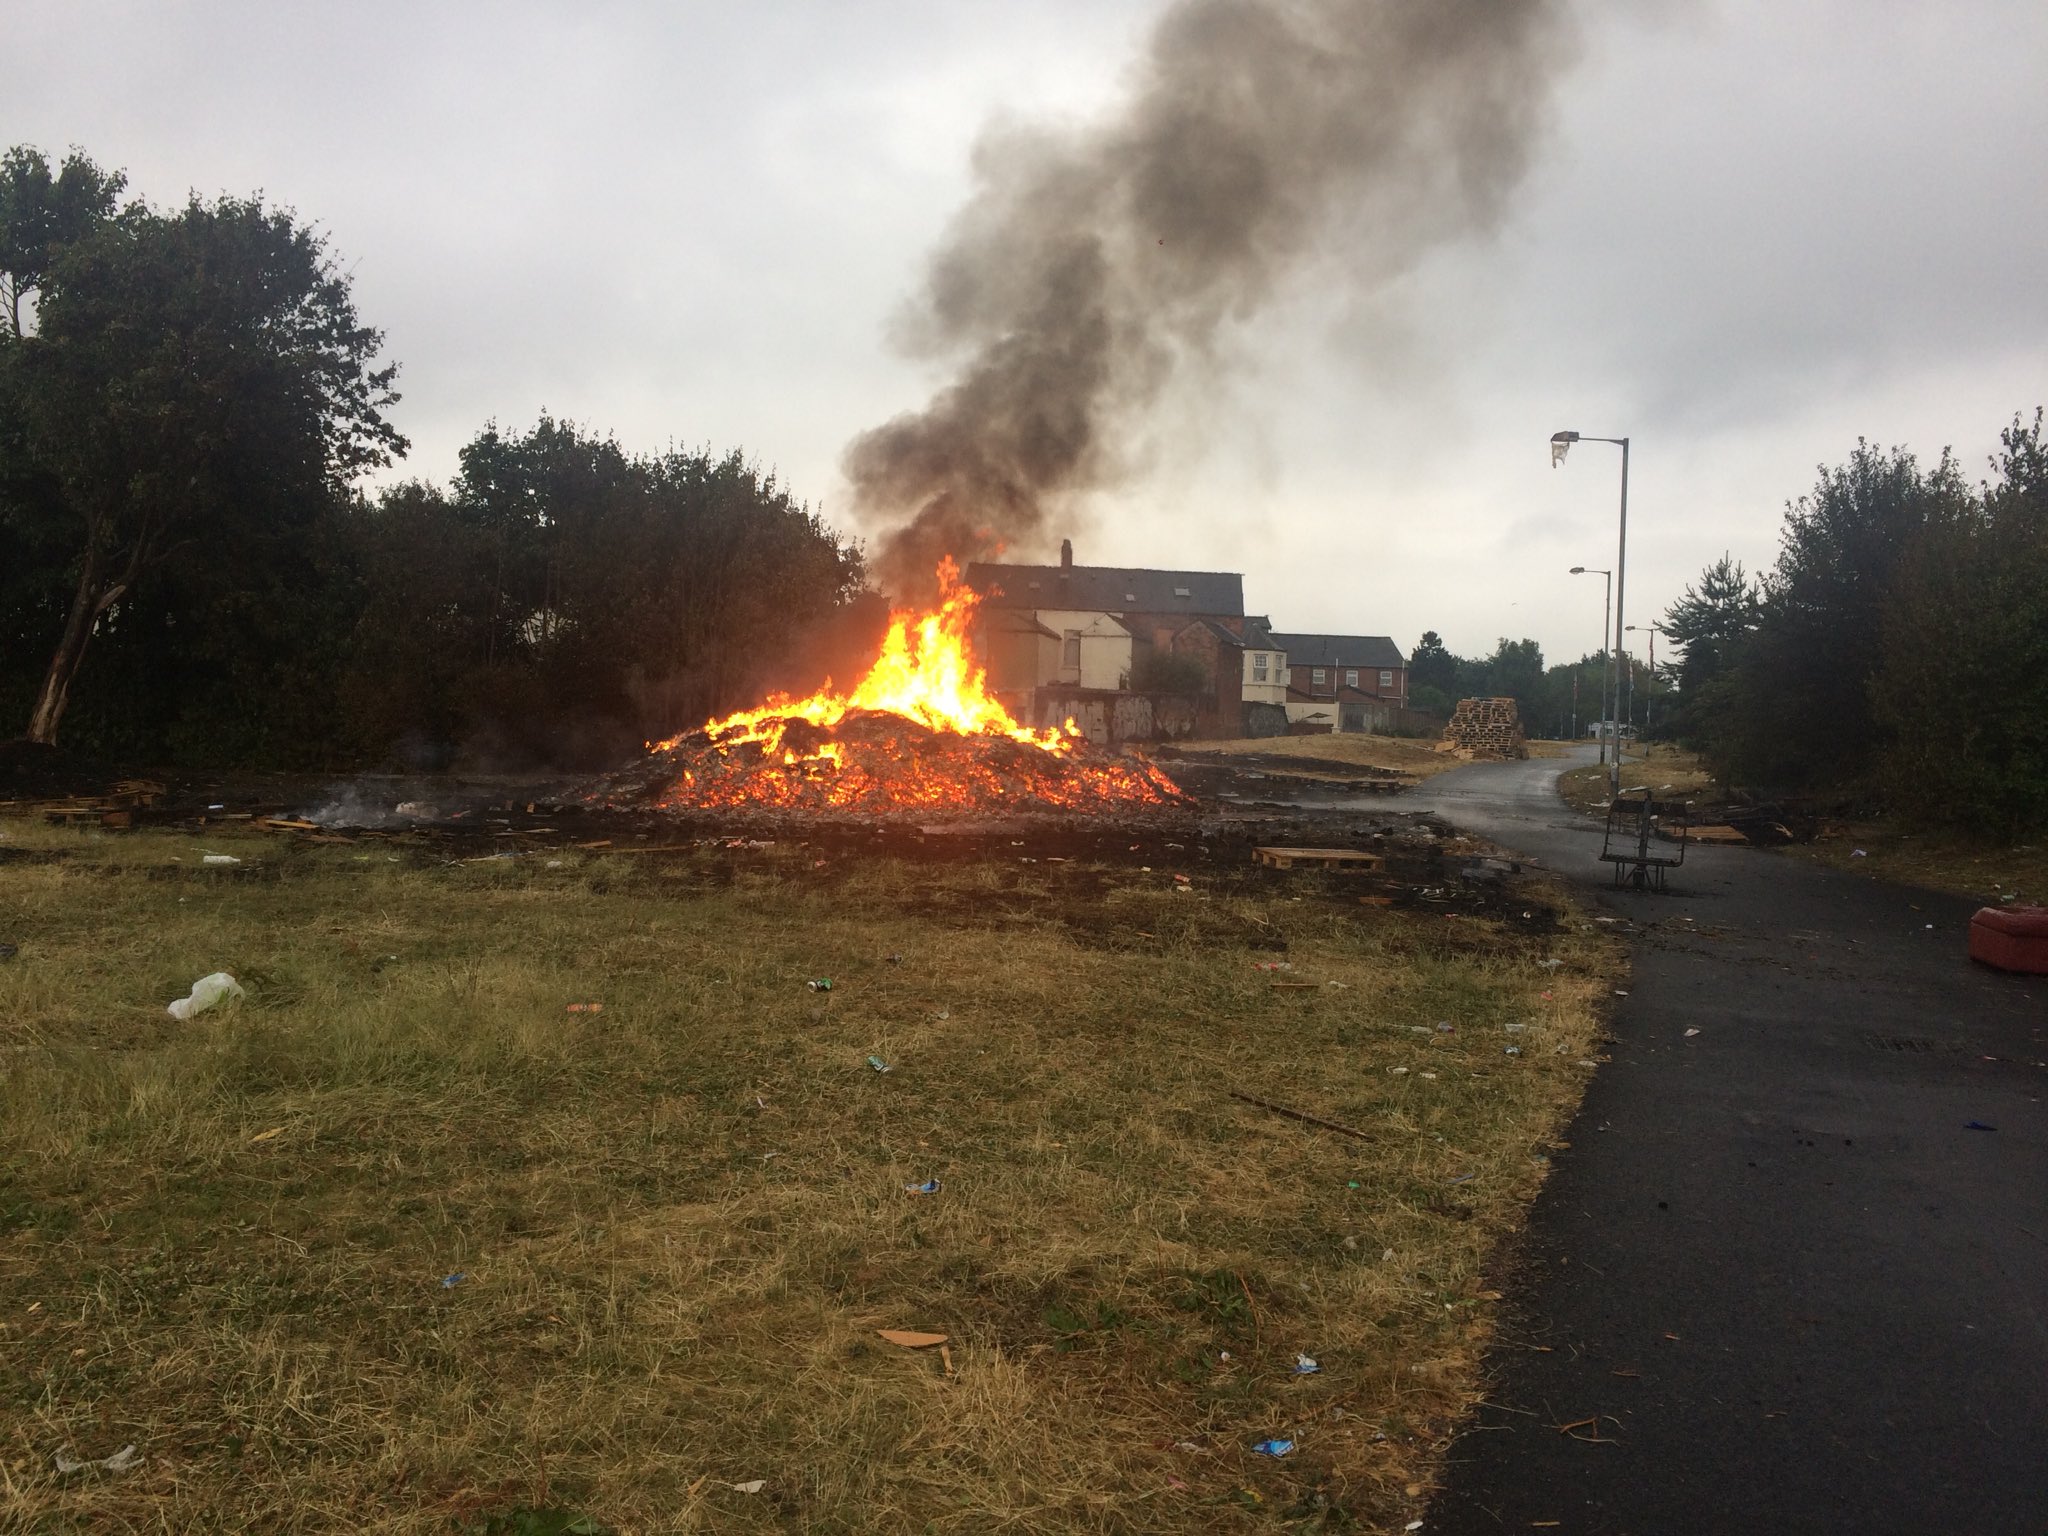 The bonfire at Bloomfield Walkway in East Belfast was set alight in the early hours of Wednesday morning